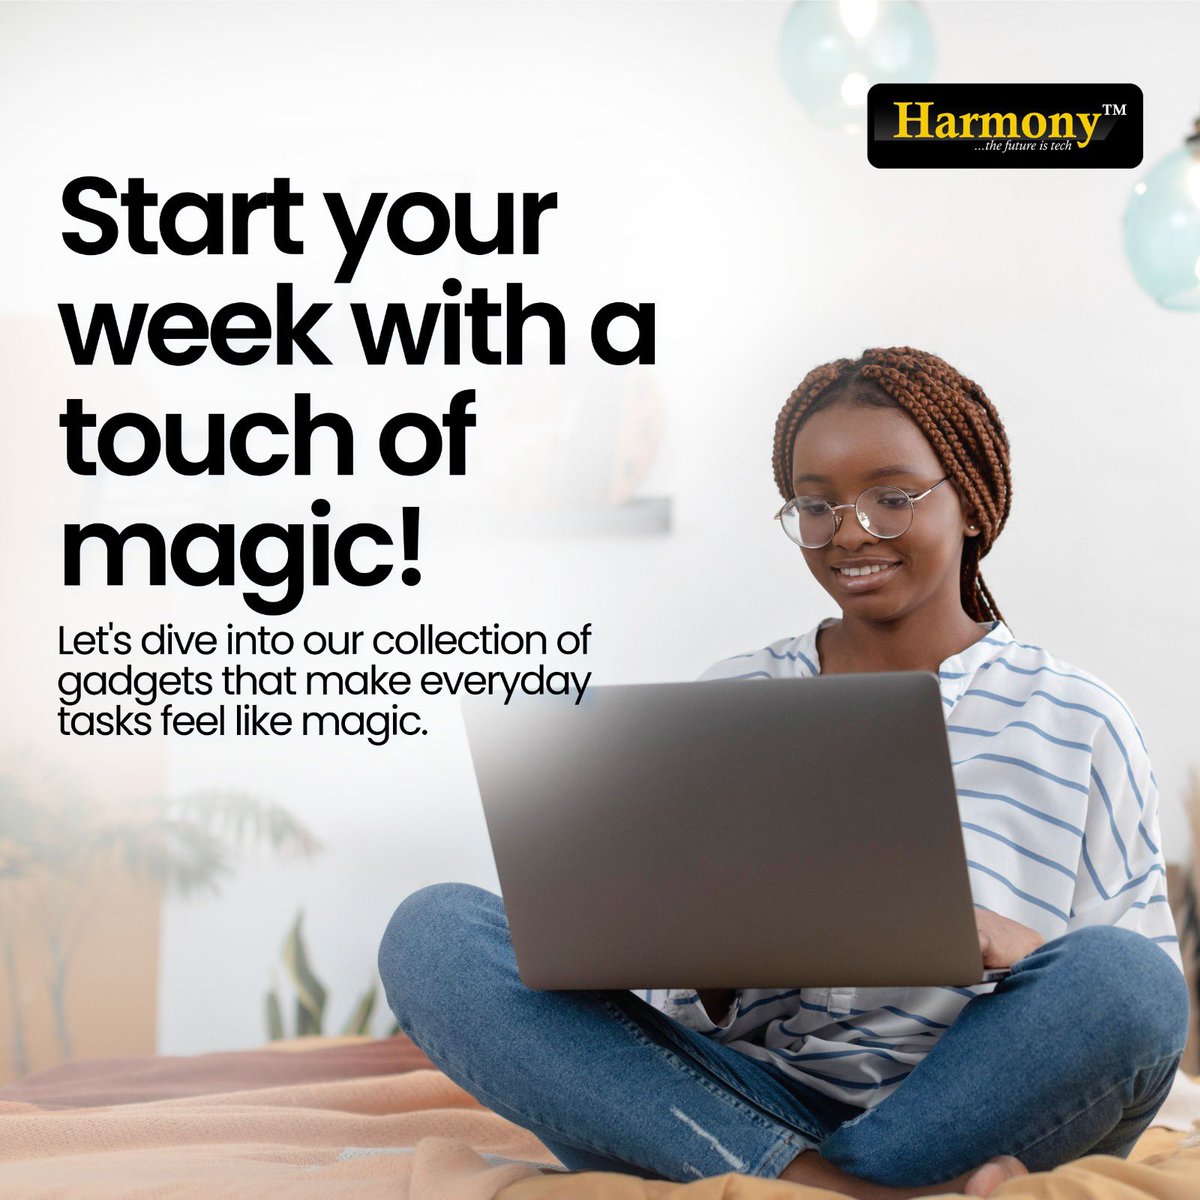 Elevate your Monday game with the latest tech essentials! Start the week with a bang as you embrace efficiency, connectivity, and style #harmonystoresng #harmonygroupng #thefutureistech